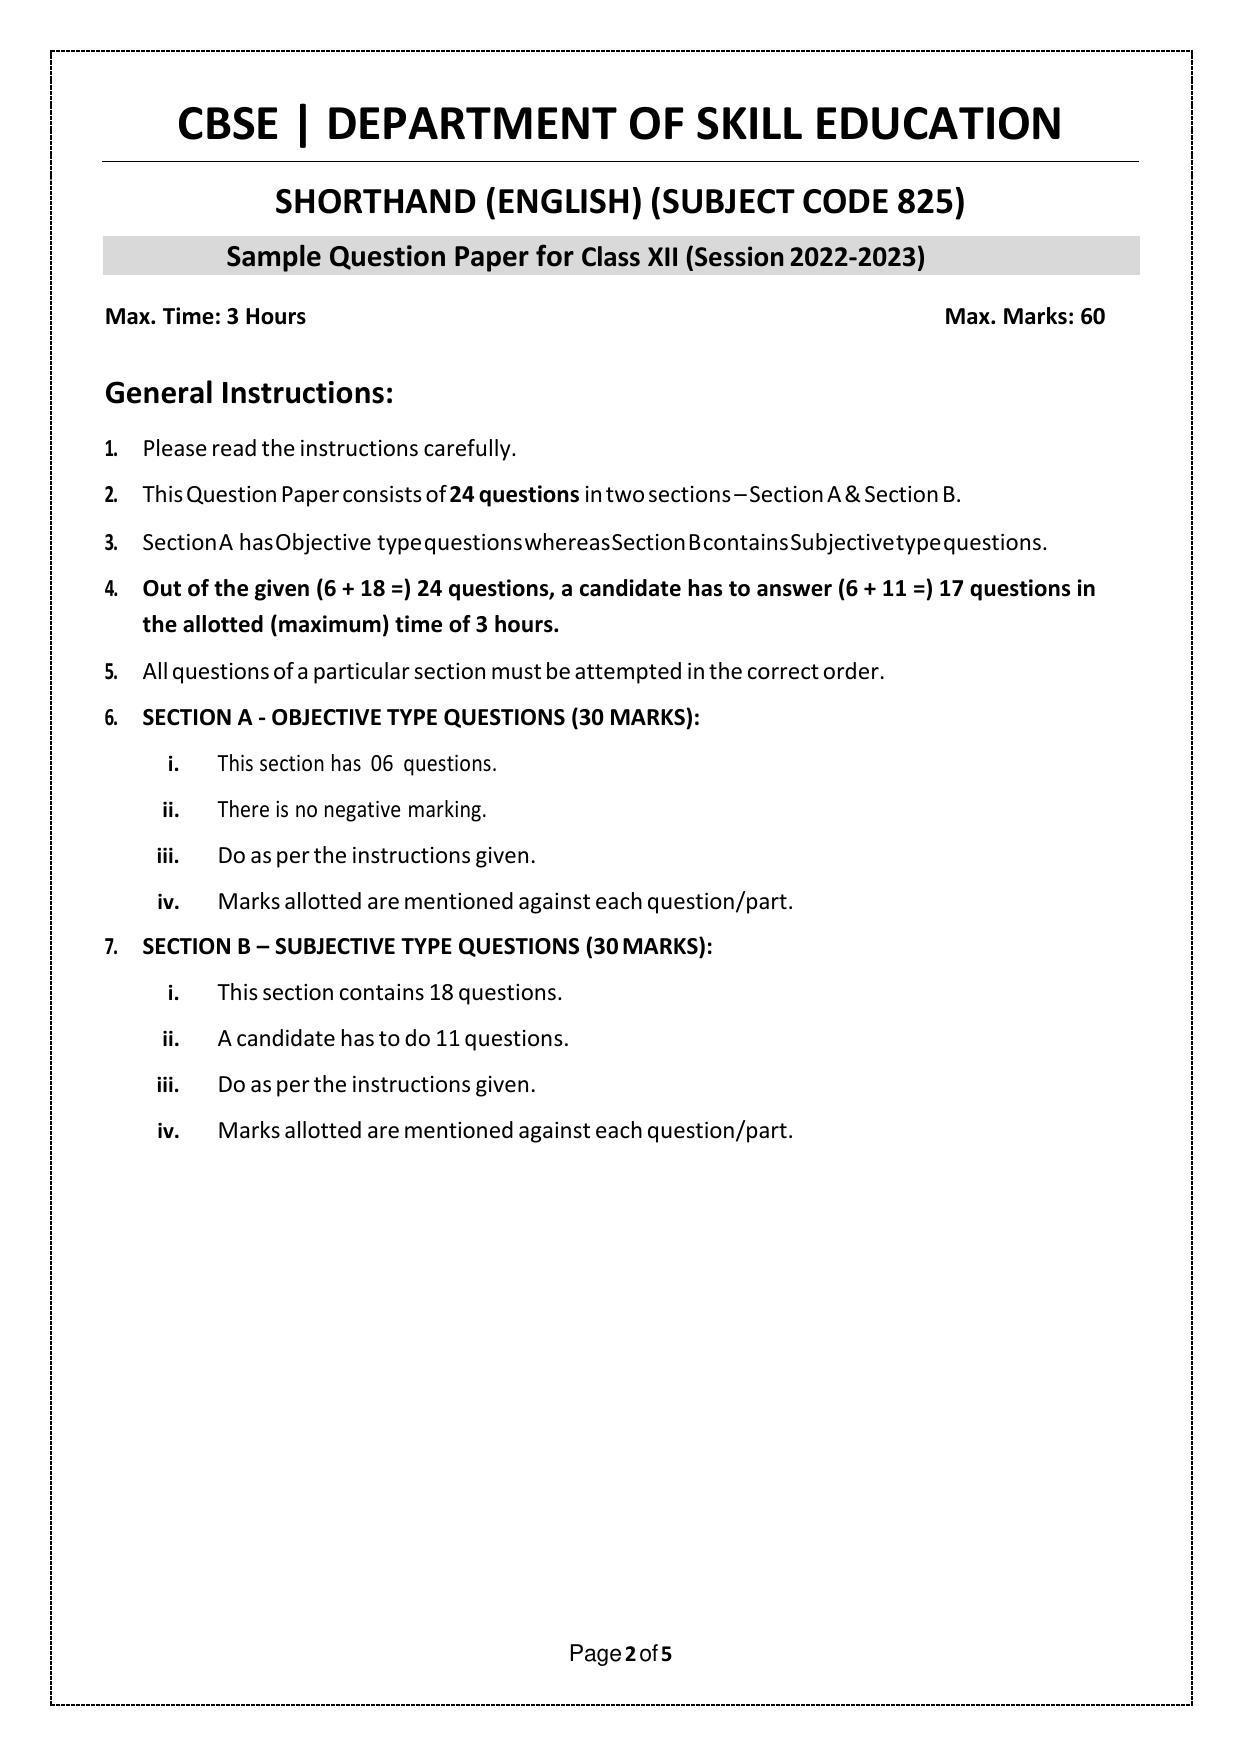 CBSE Class 12 Shorthand (English) (Skill Education) Sample Papers 2023 - Page 2